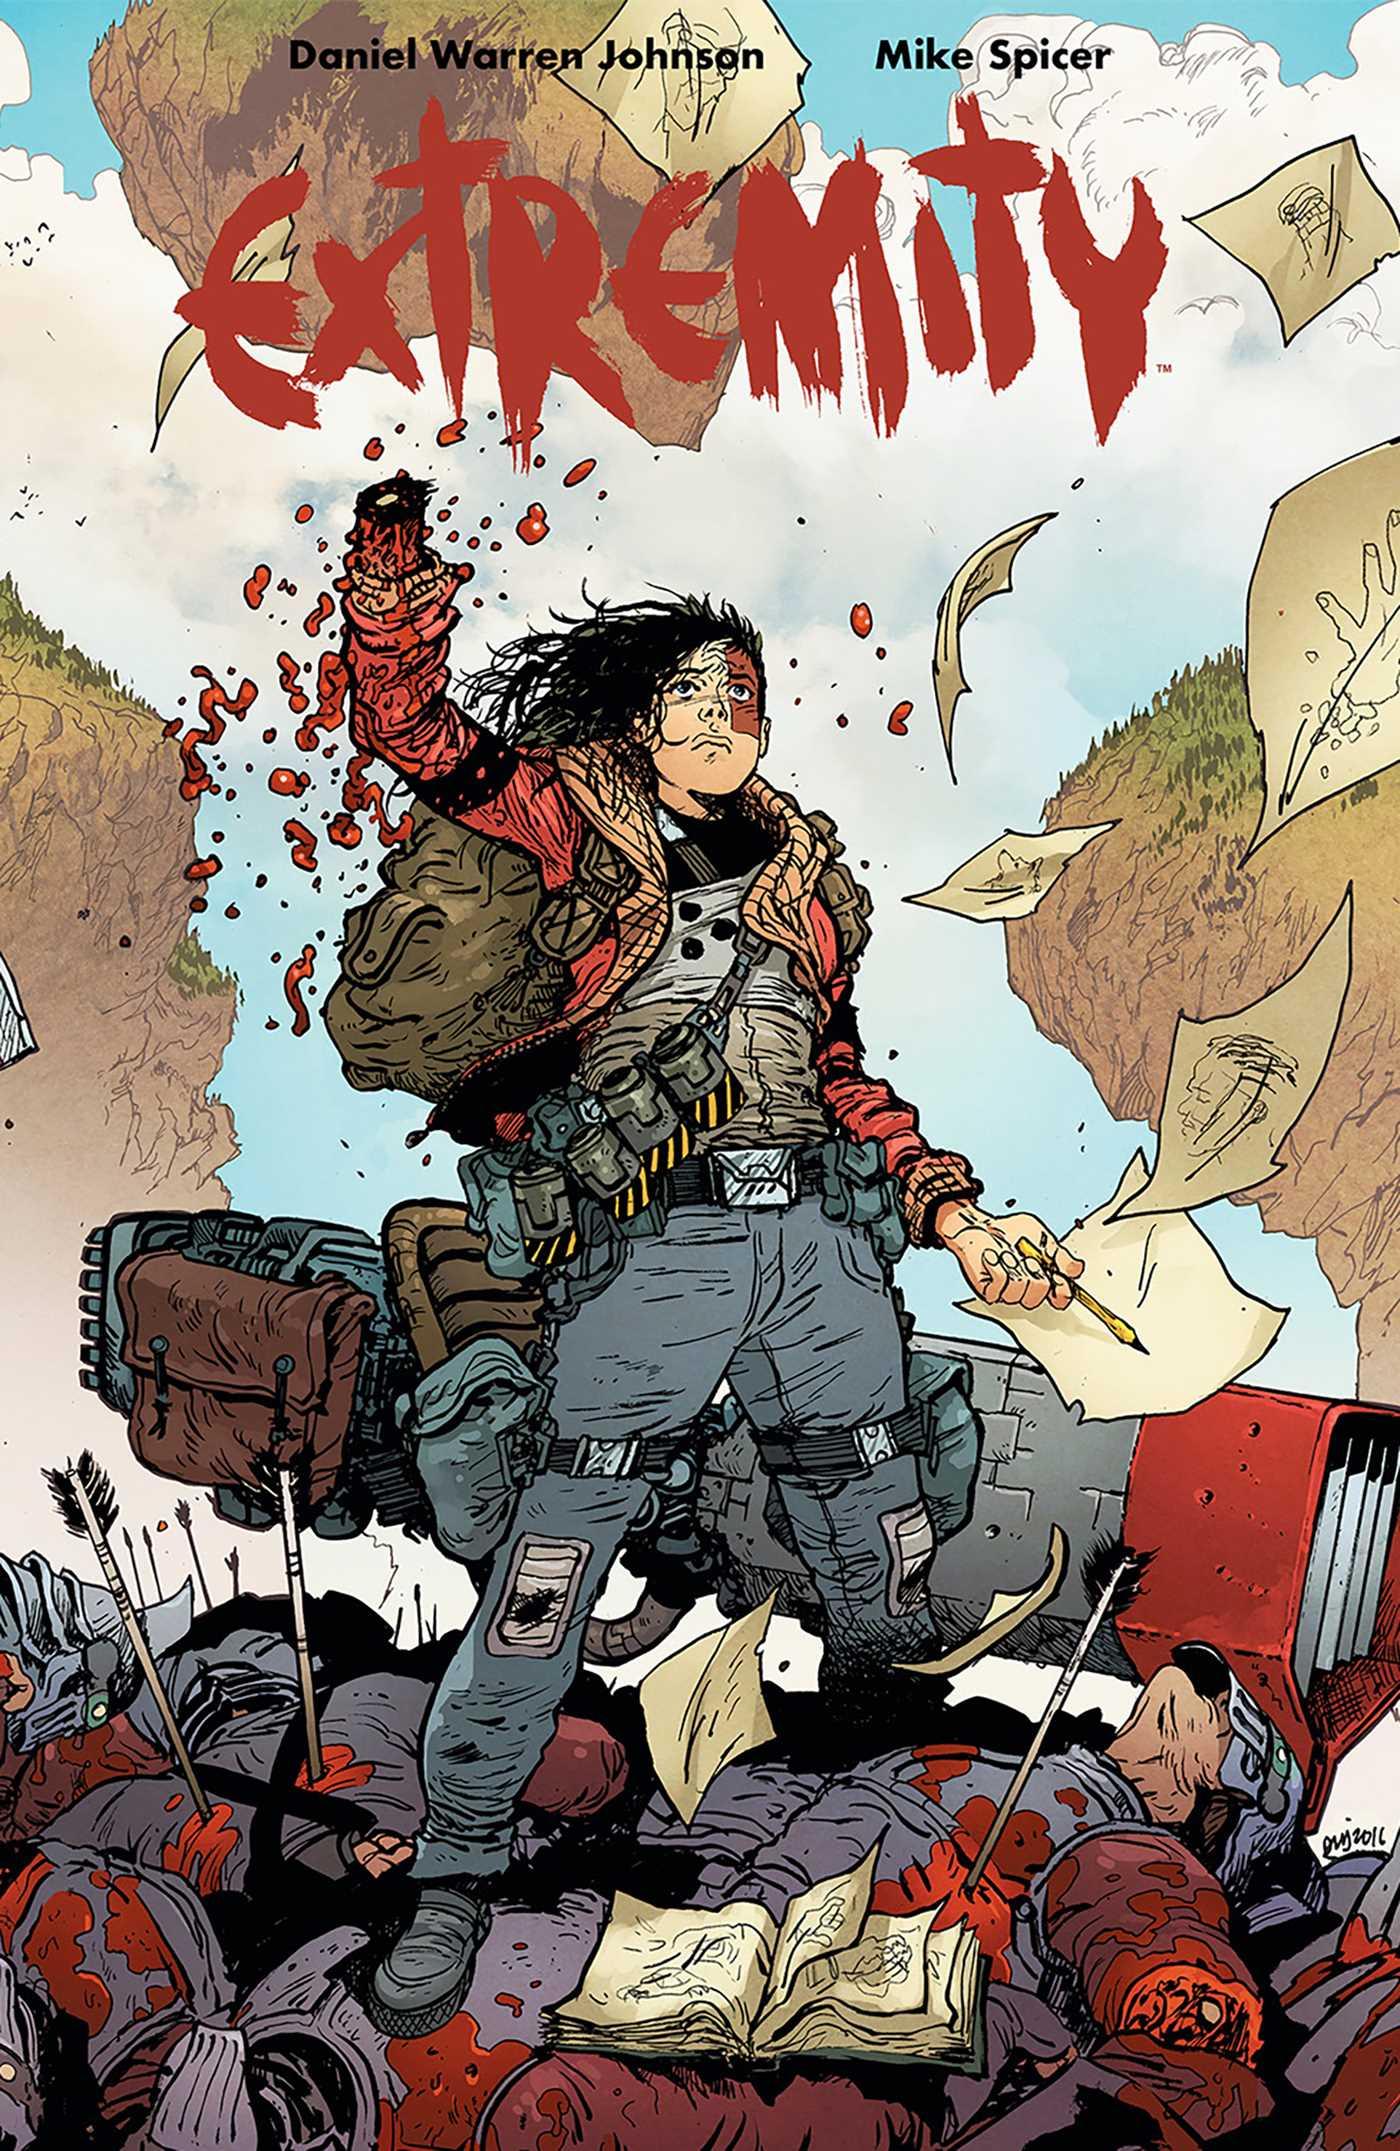 Extremity Deluxe Edition